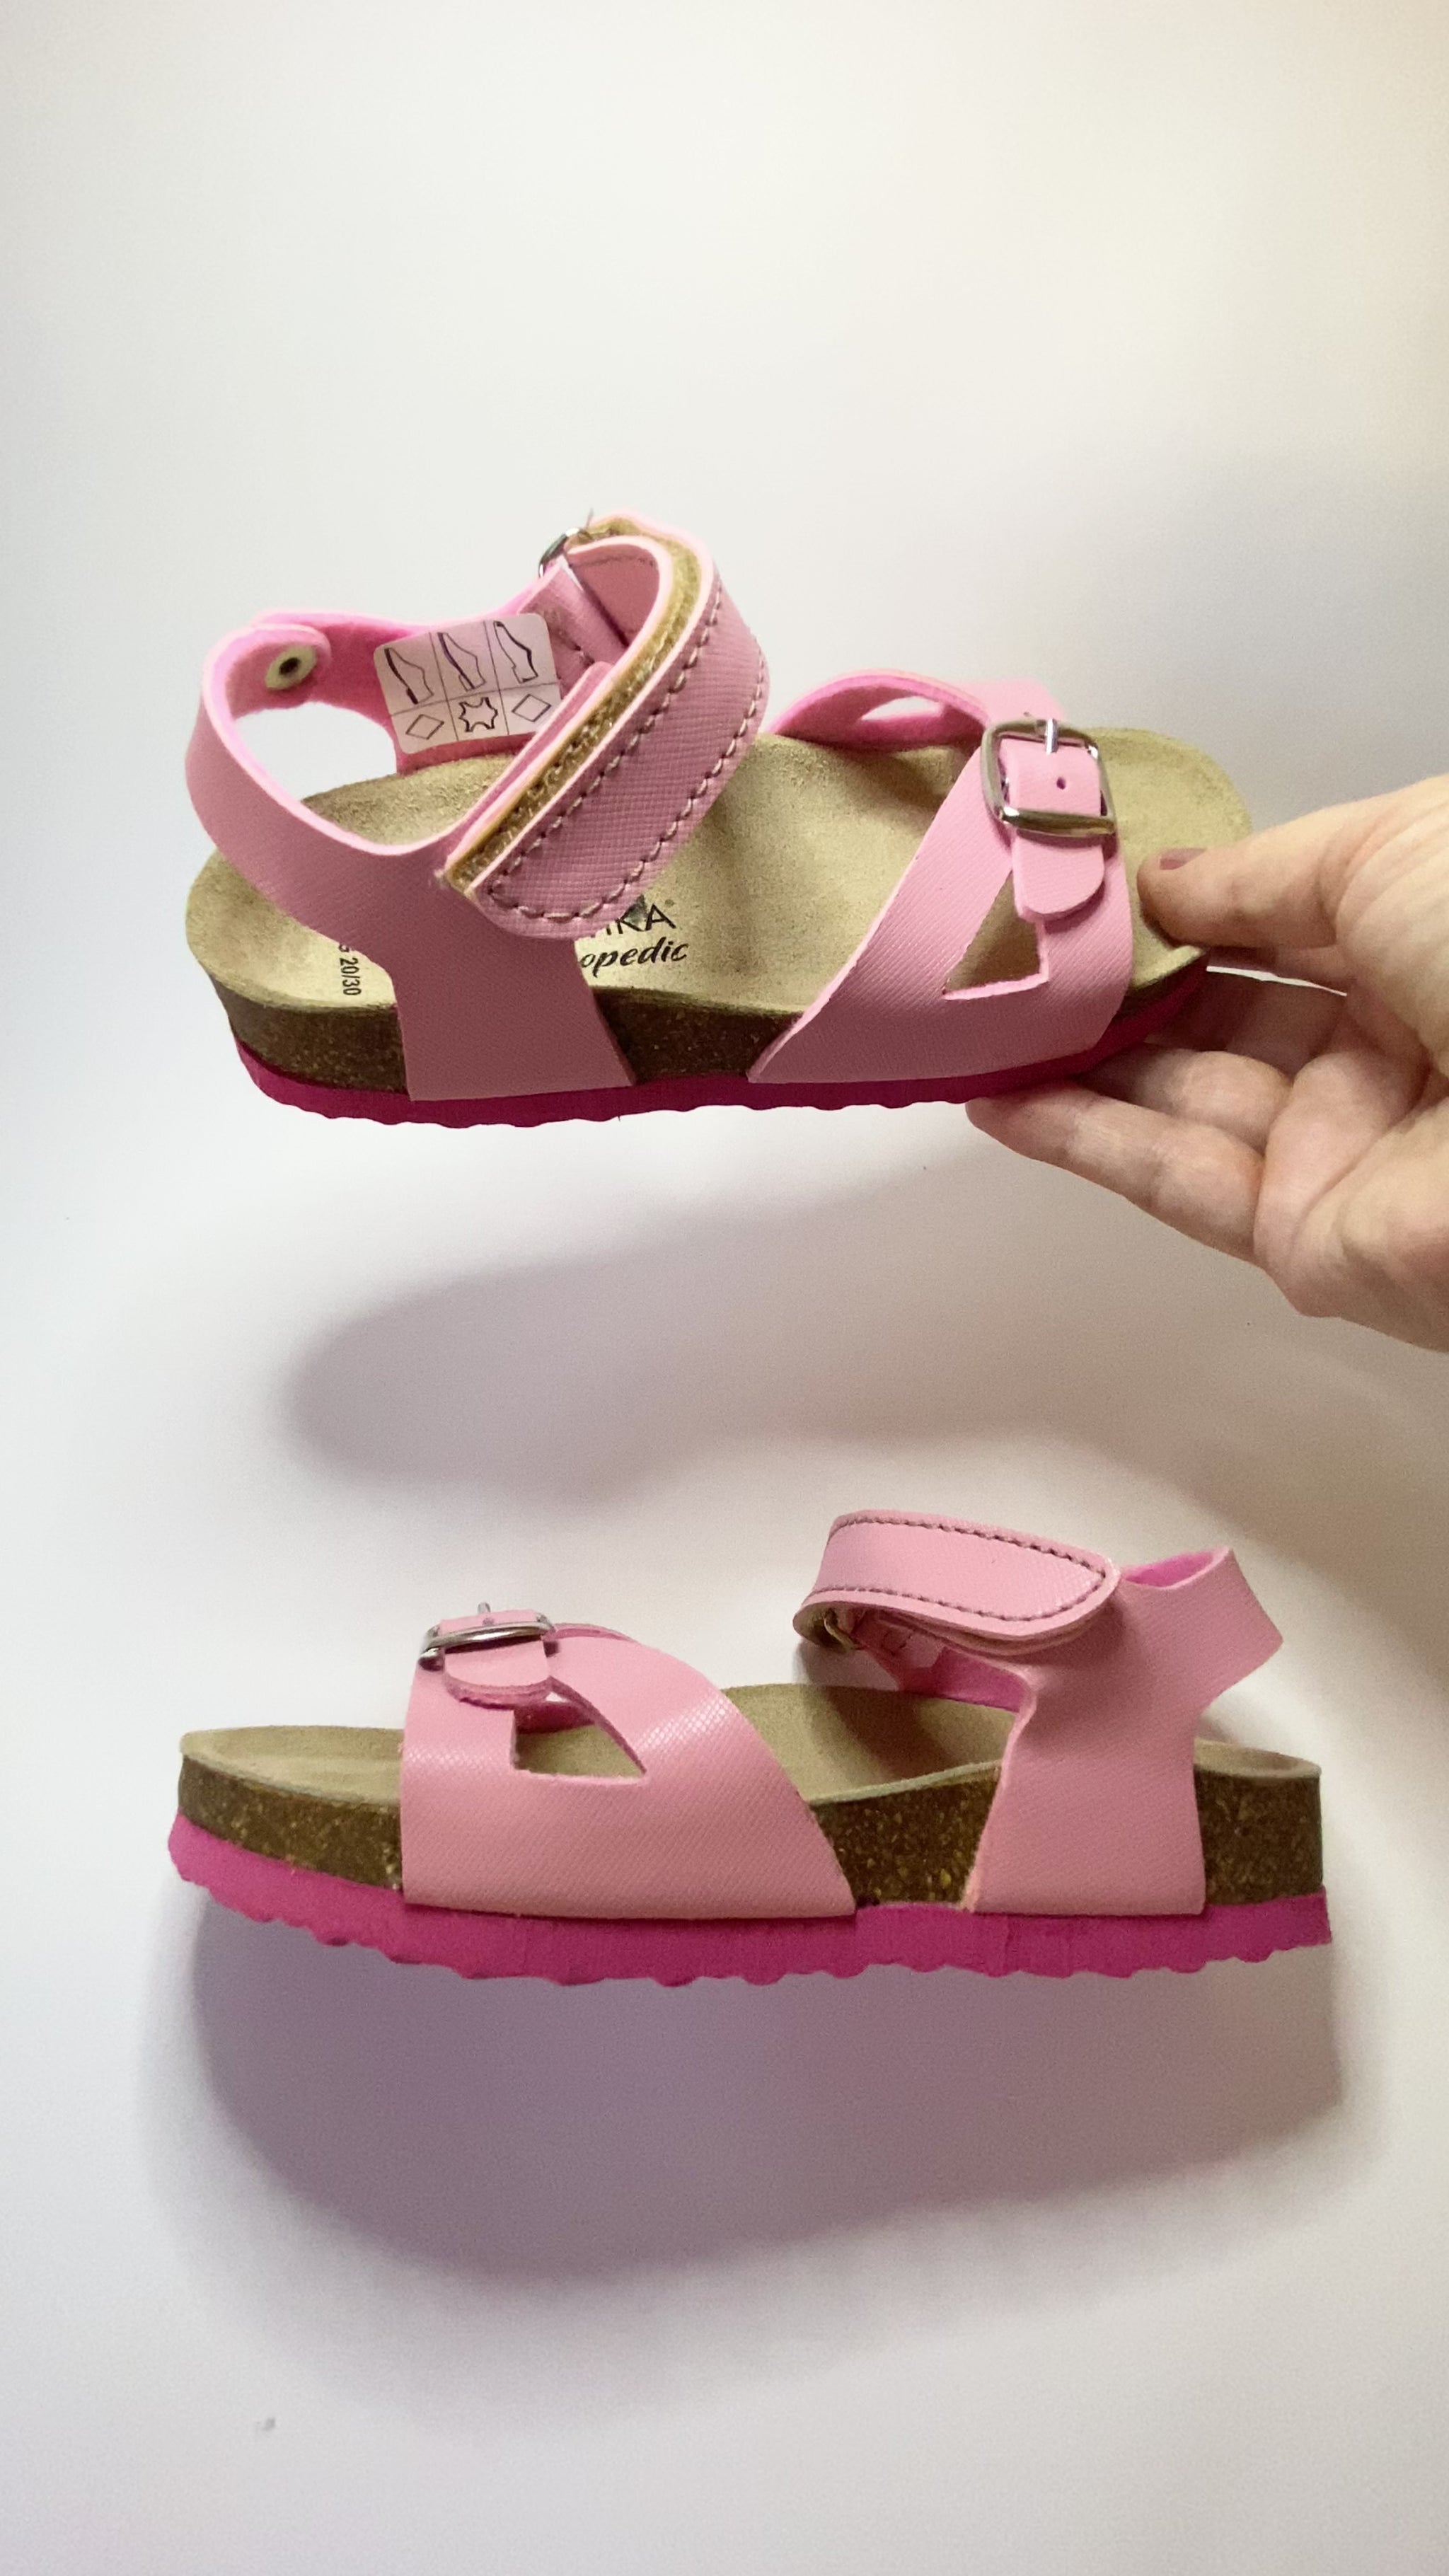 A presentation of pink orthotic sandals for older girls, from Protetika brand.